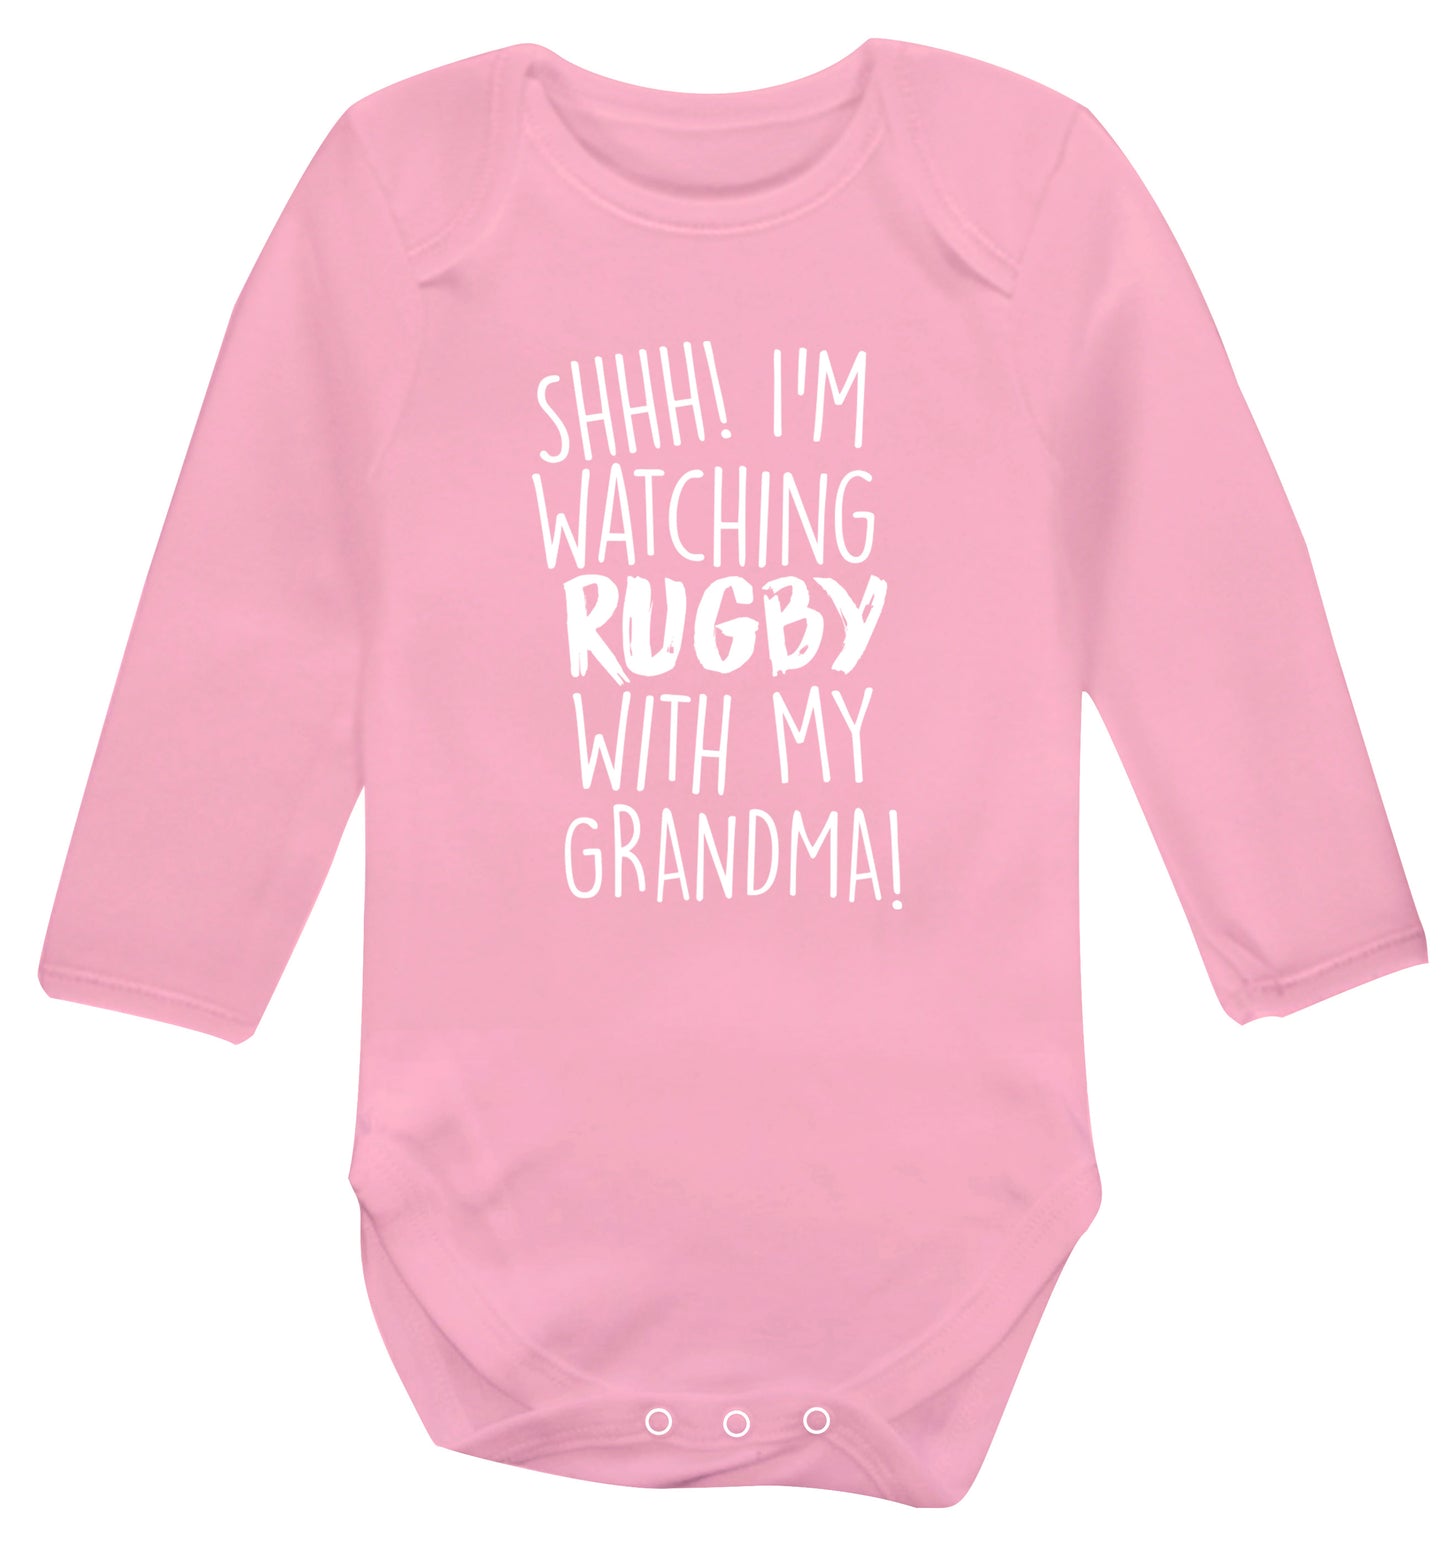 Shh I'm watching rugby with my grandma Baby Vest long sleeved pale pink 6-12 months